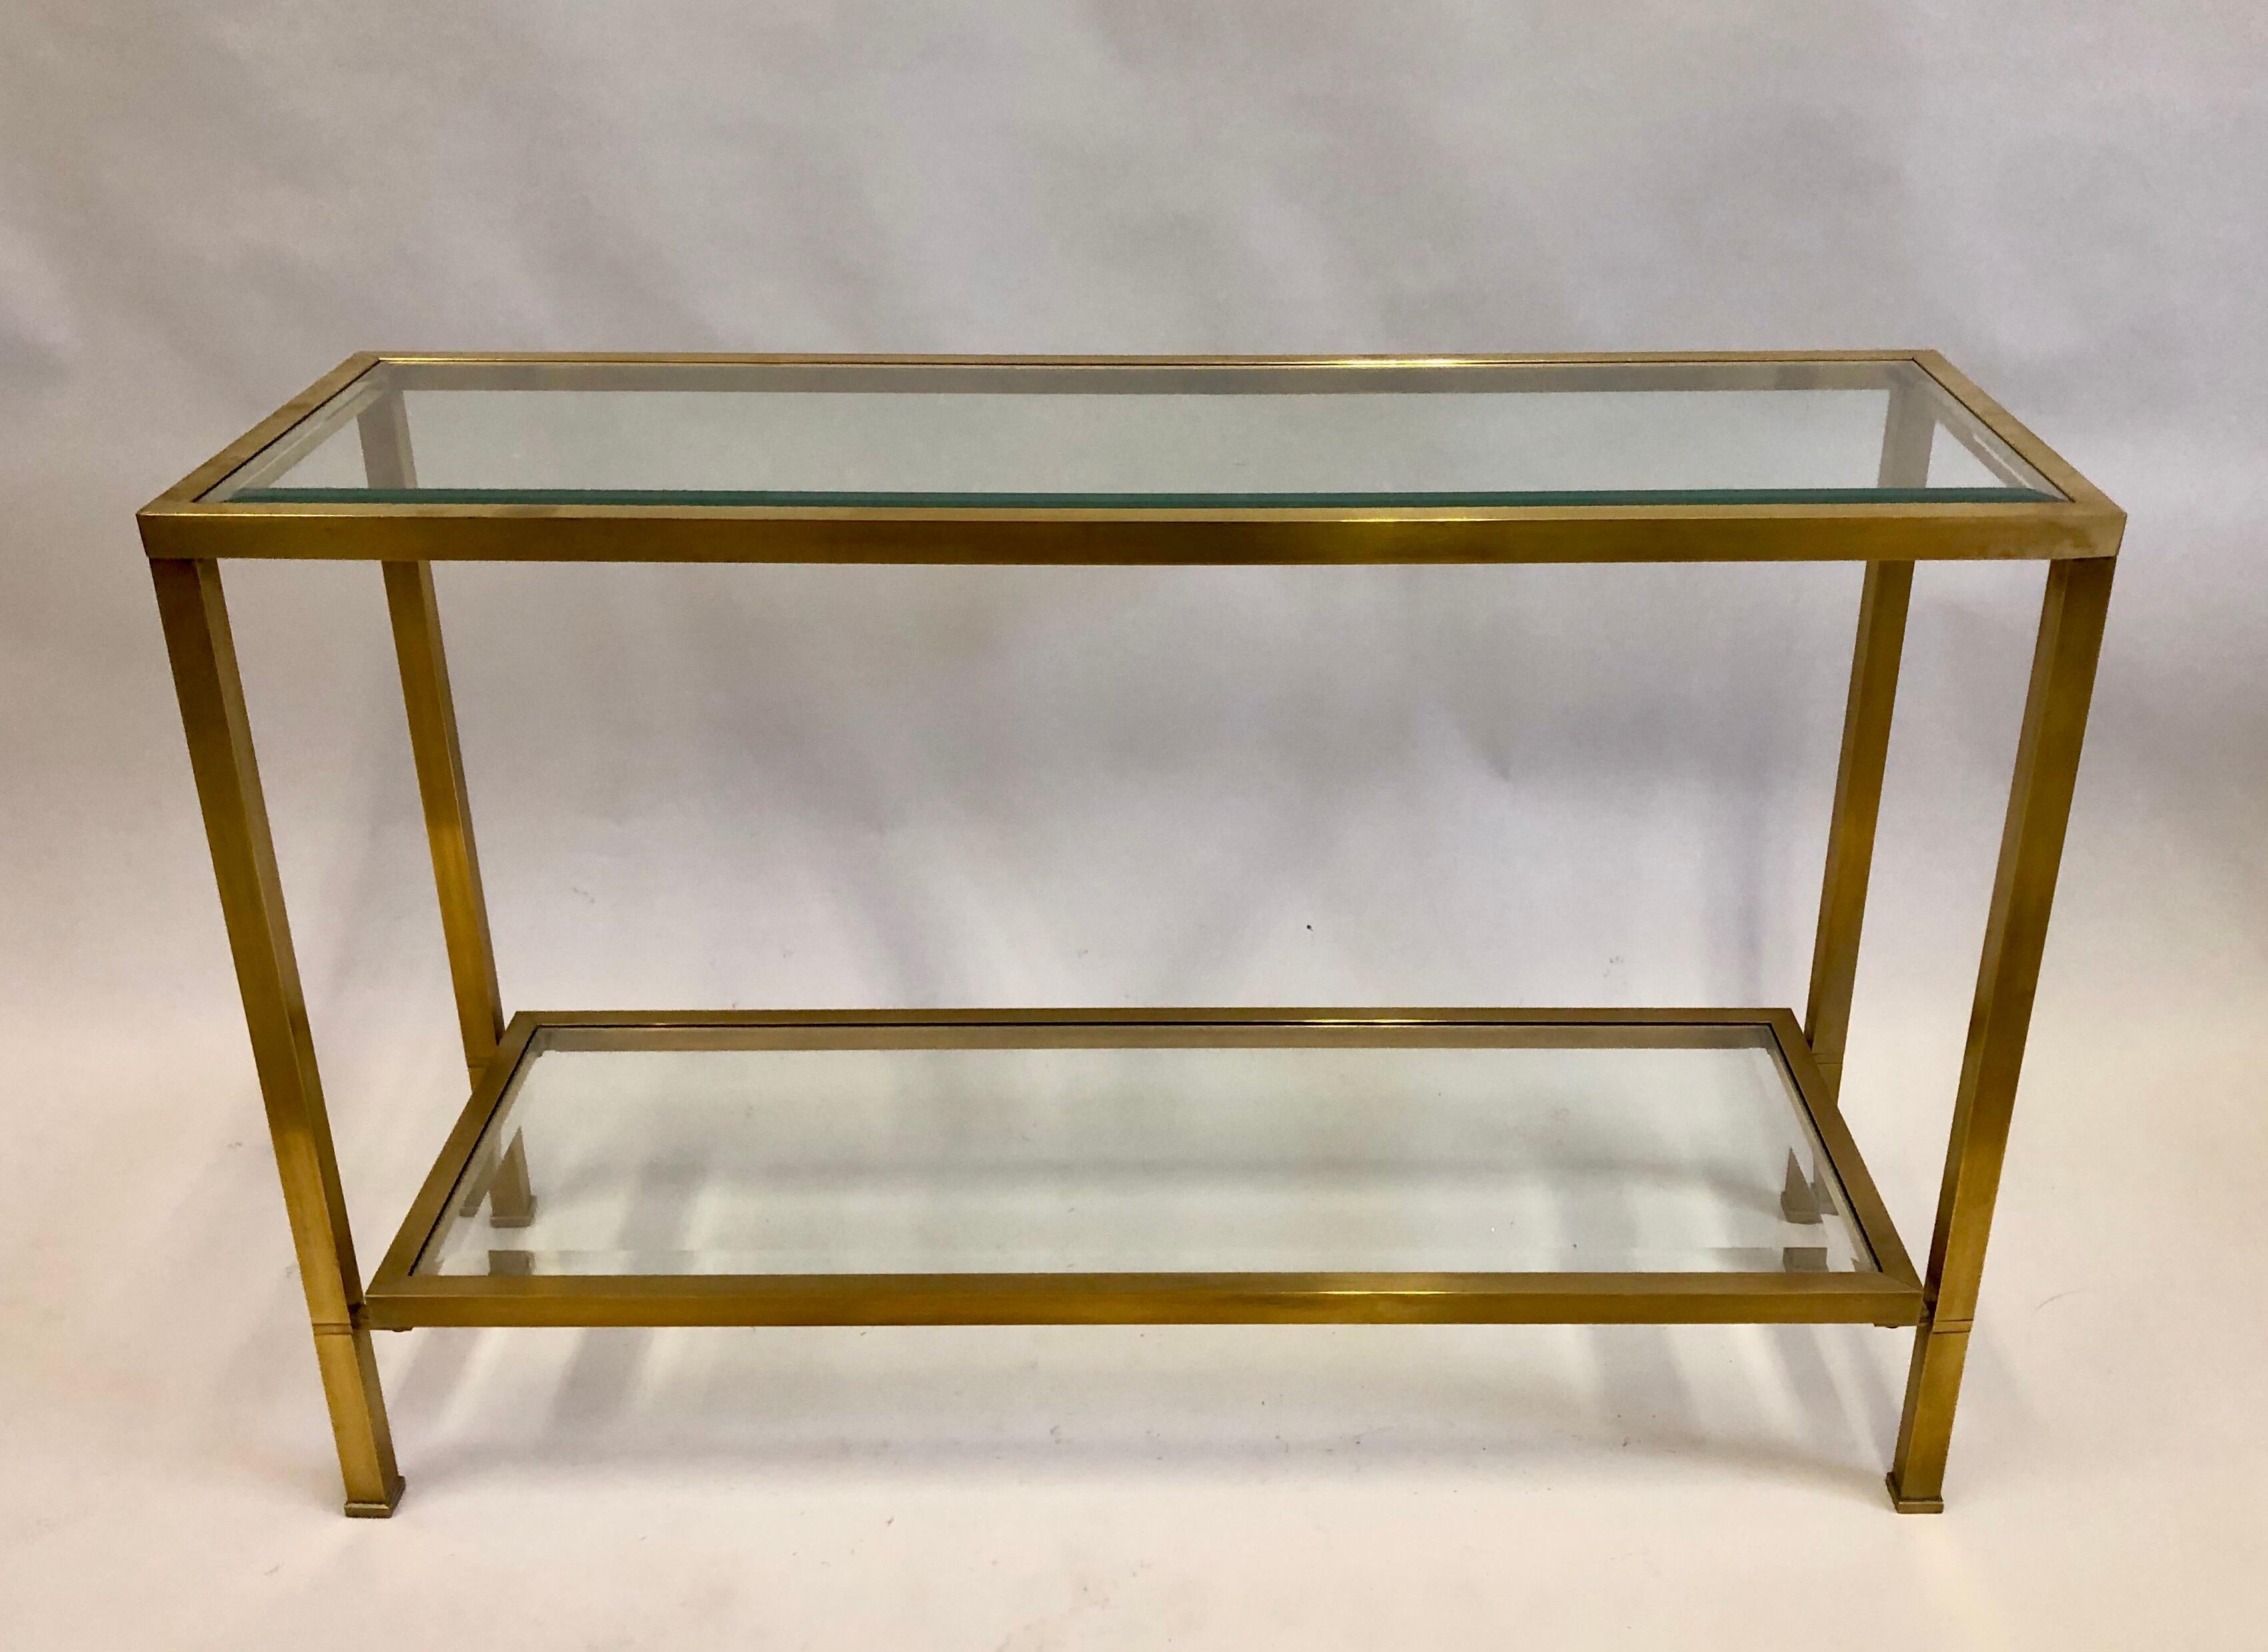 Elegant French Midcentury Solid Brass and glass double level console or sofa table in the Modern Neoclassical Style. The table is attributed to Jacques Quinet and features sober, refined detailing with the exquisite square form sabots that are